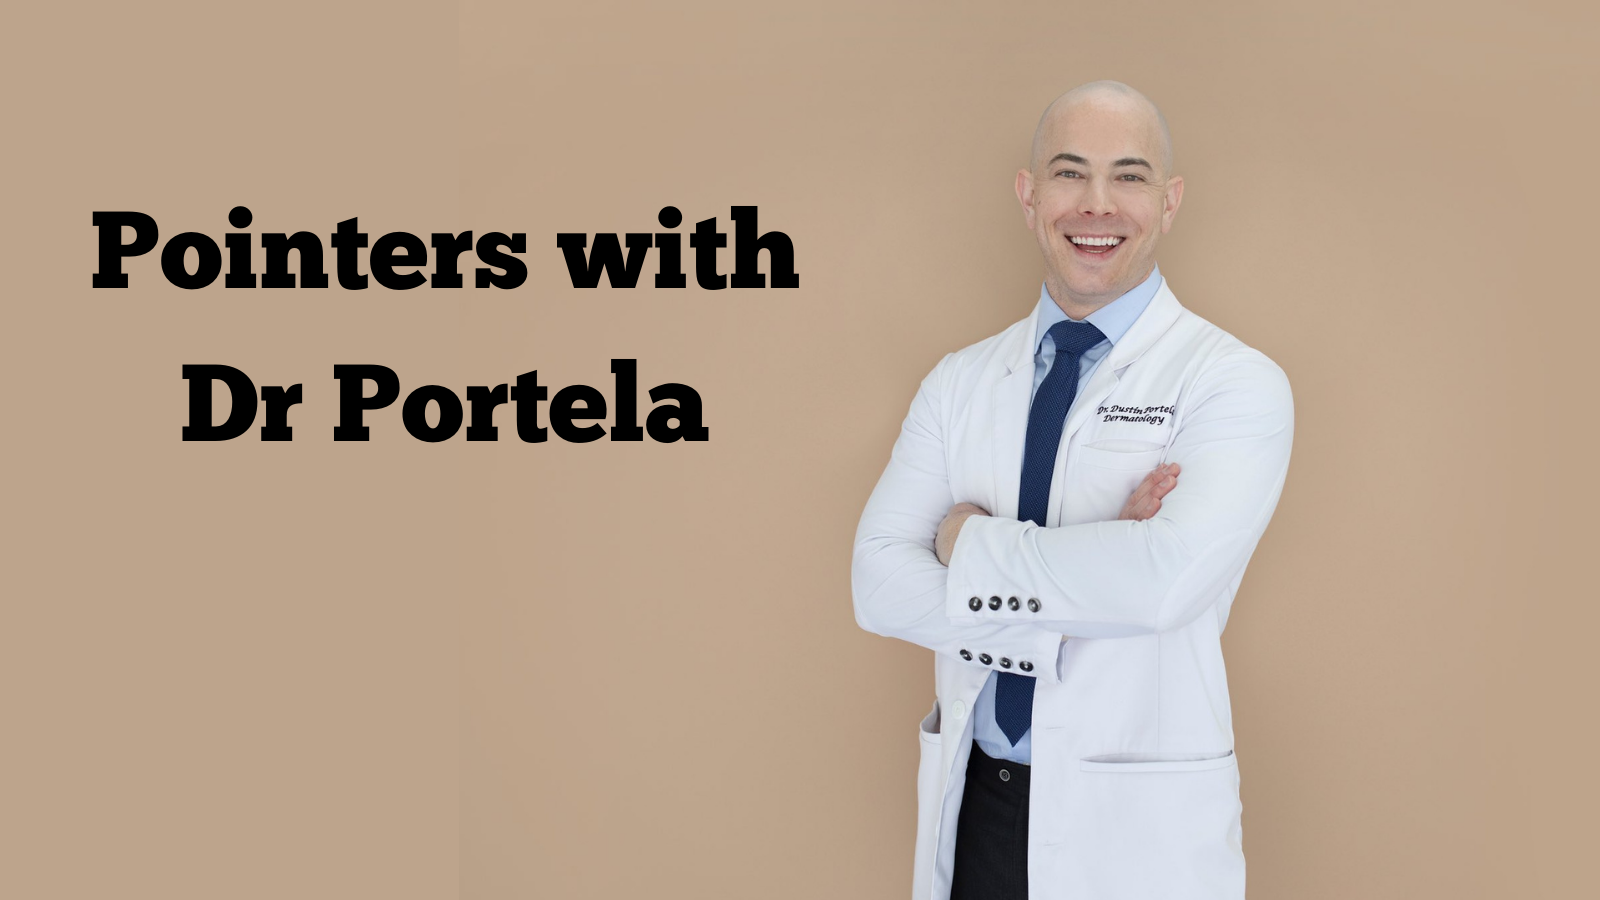 Pointers with Dr Portela: Treating Dandruff